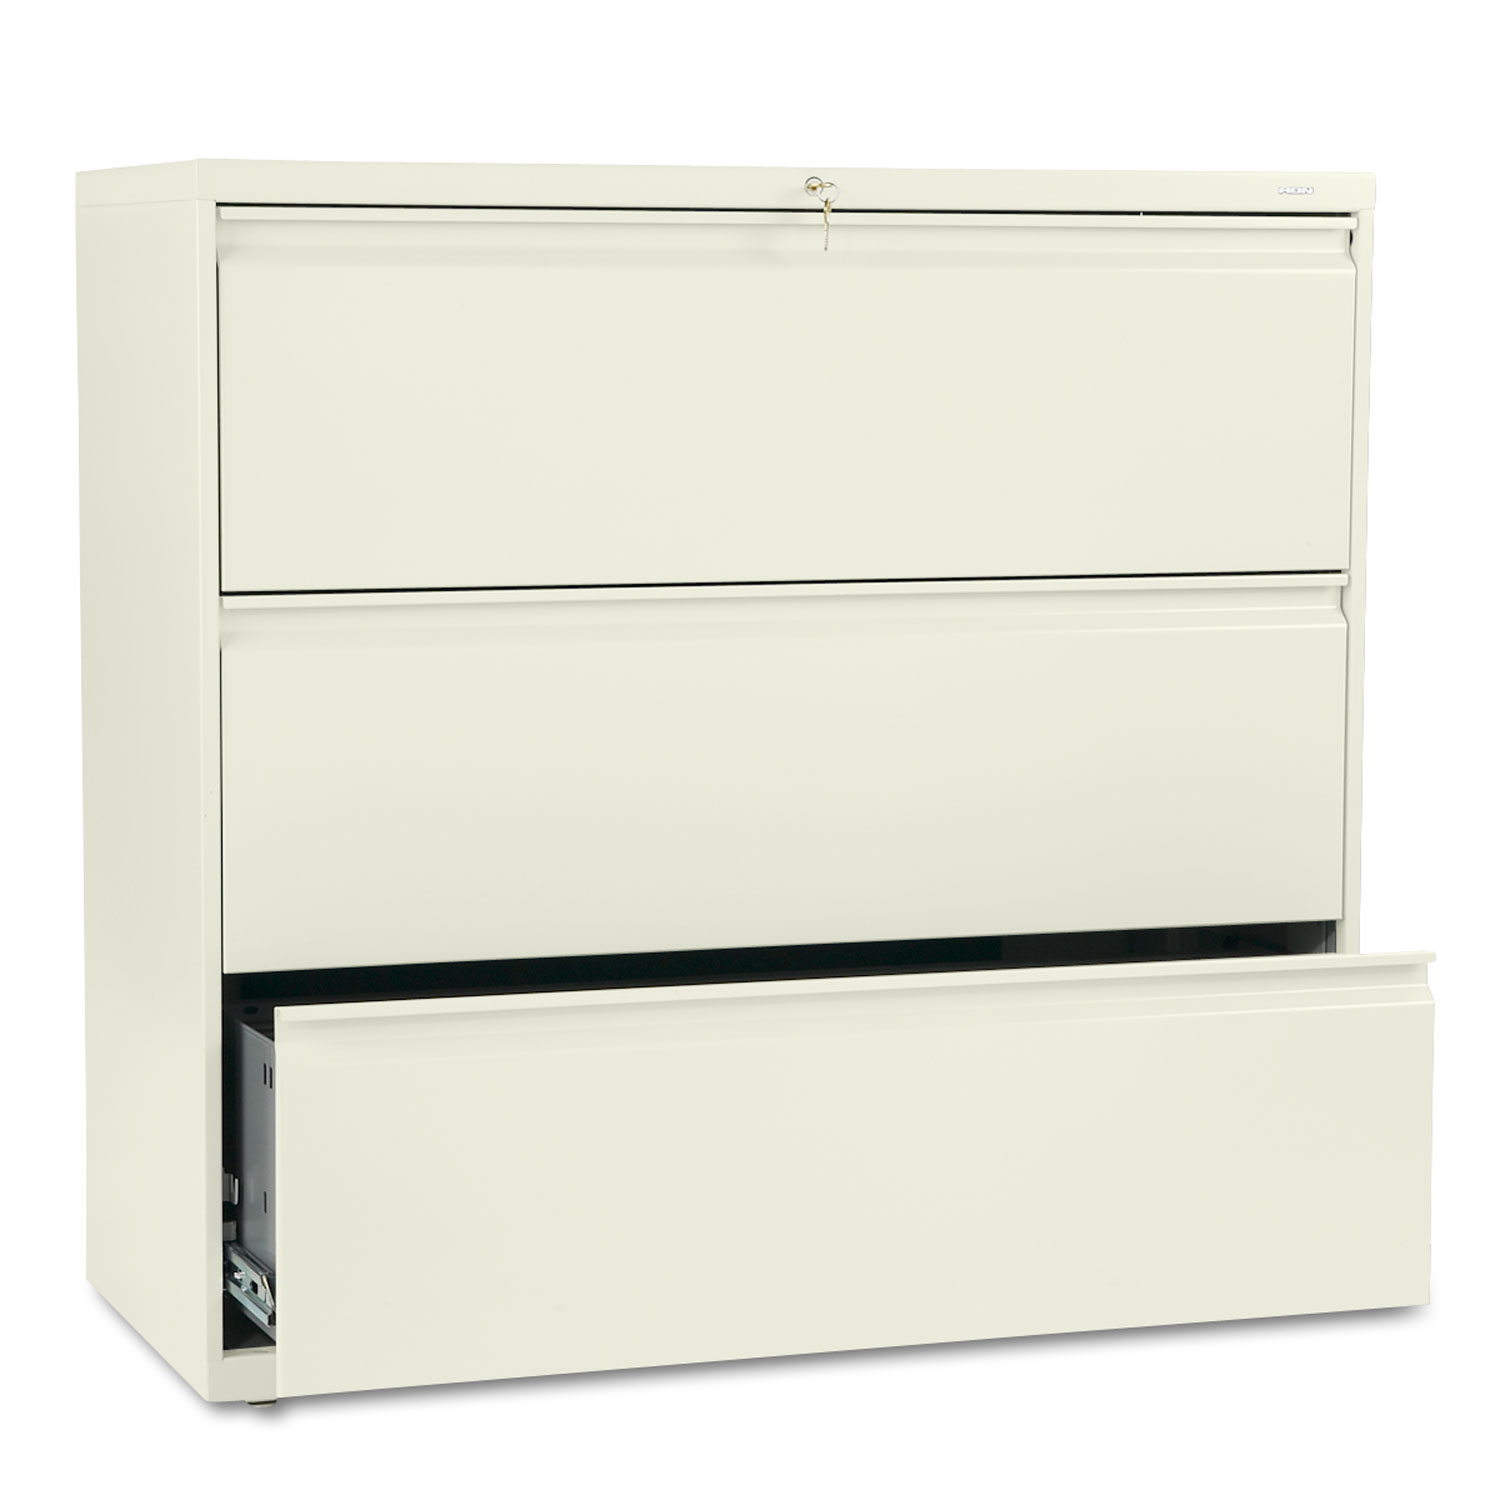 800 Series Three-Drawer Lateral File, 42w x 19-1/4d x 40-7/8h, Putty